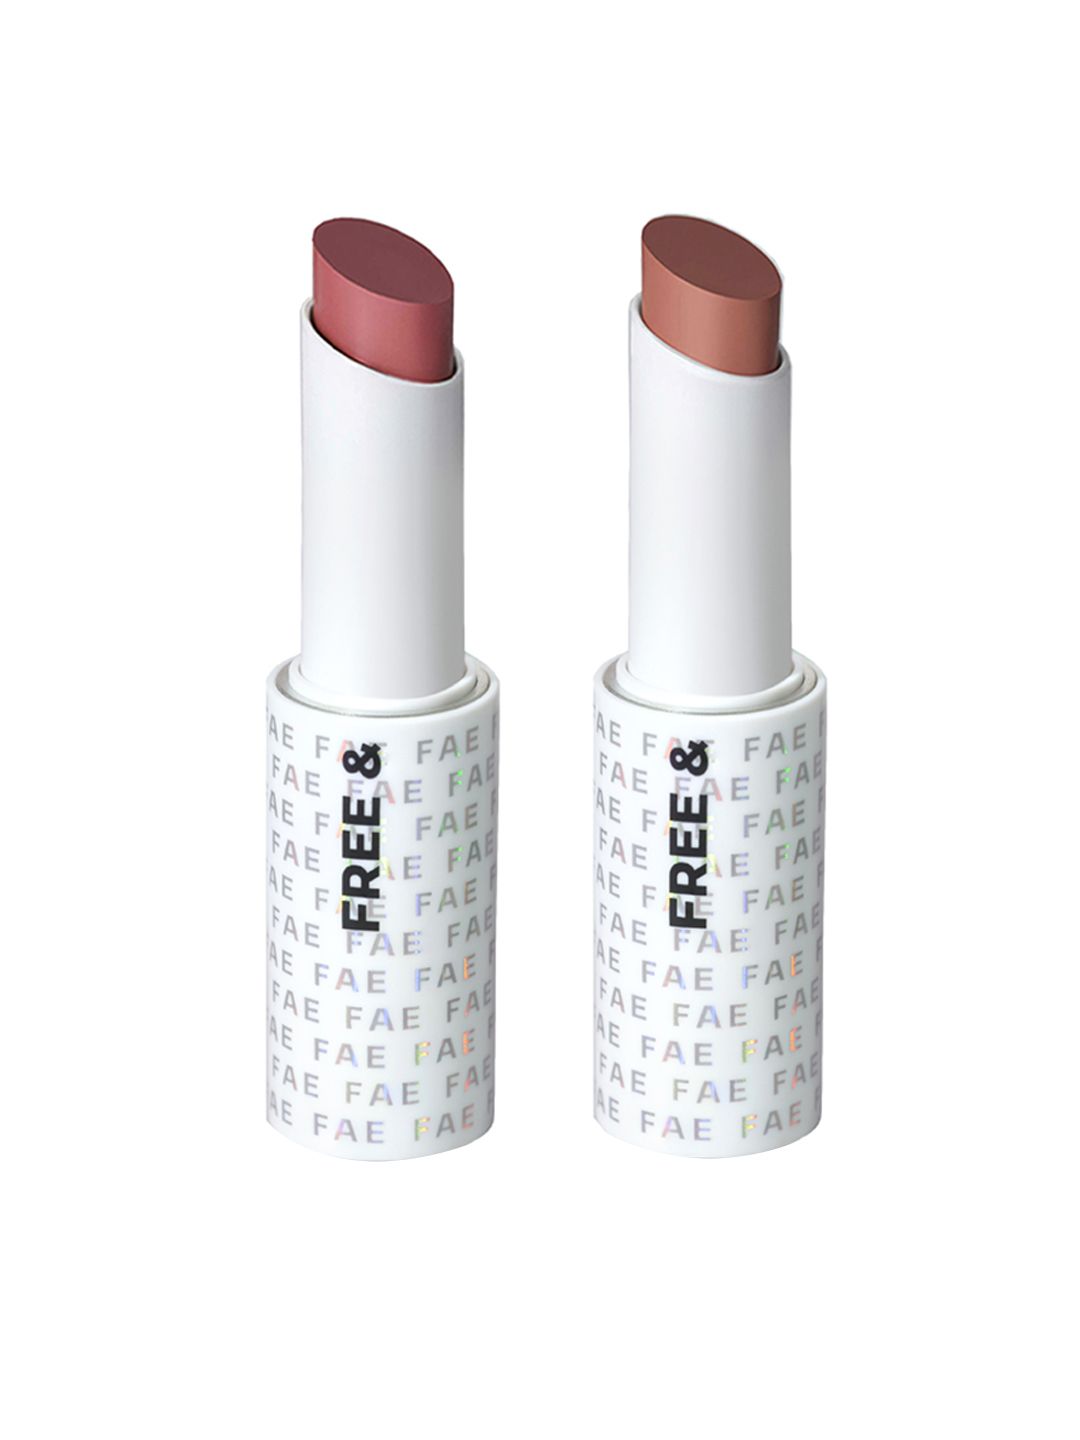 FAE BEAUTY Buildable Matte Vegan Lipsticks Combo - Too Basic & Too Nude Price in India